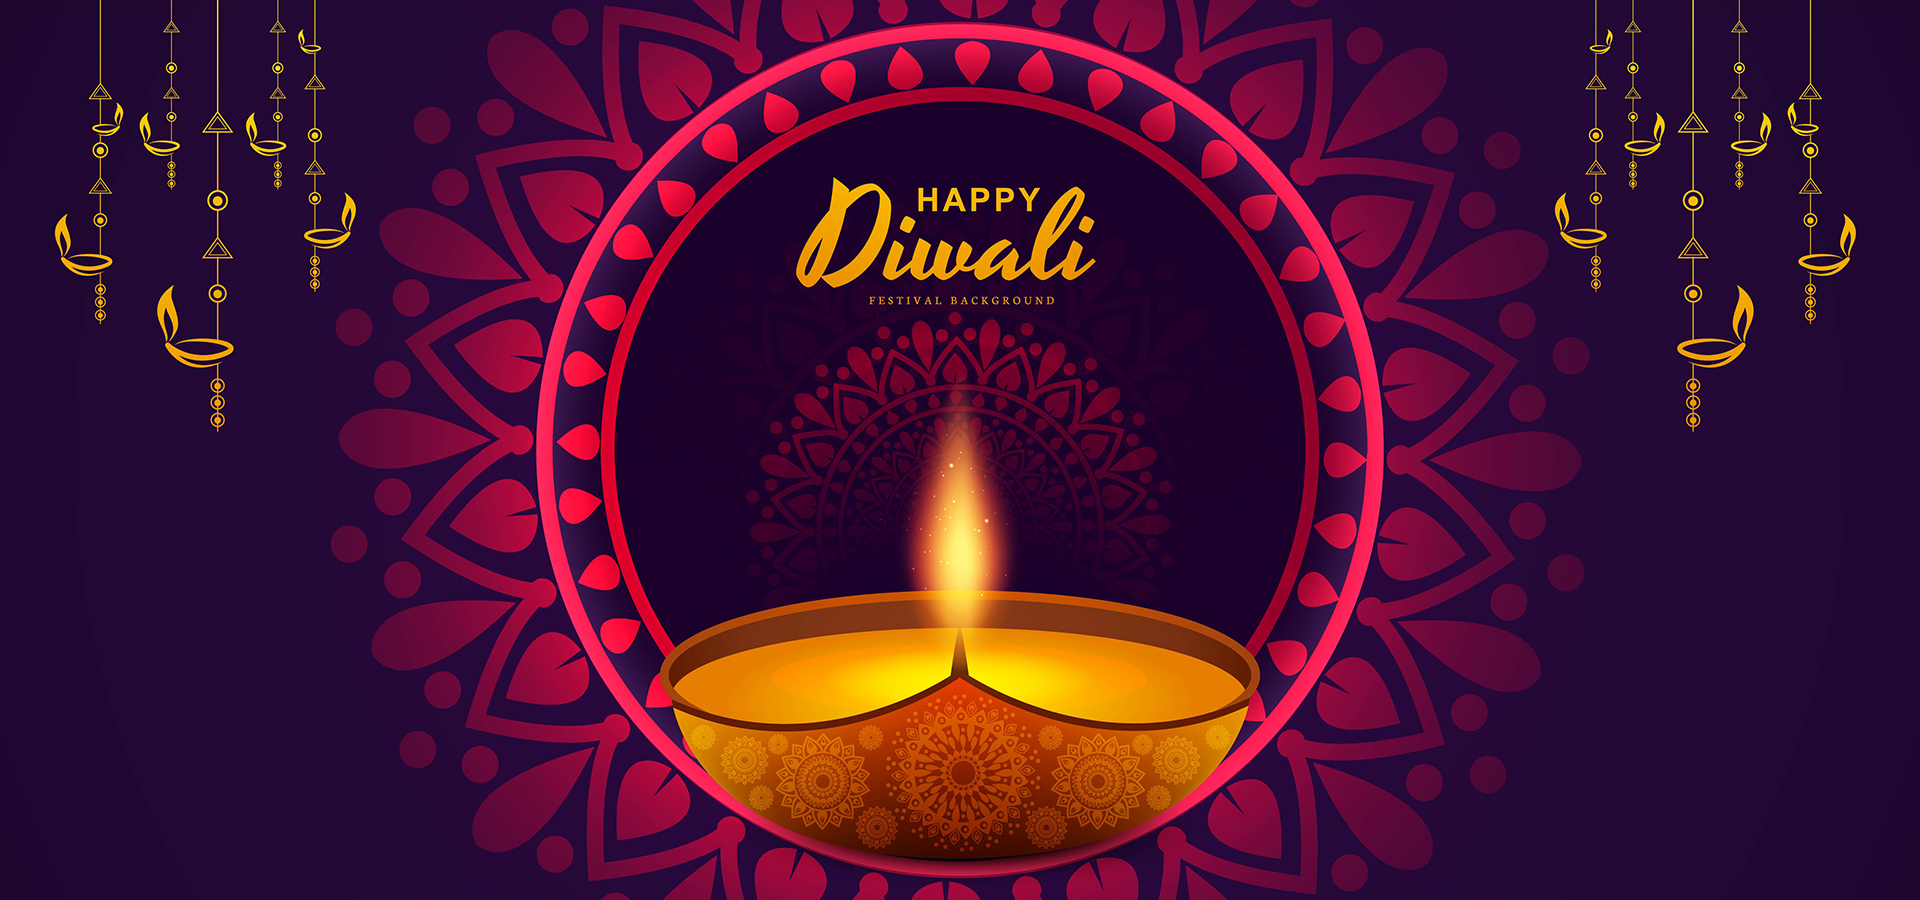 Diwali Background Images HD Pictures For Free Vectors  PSD Download   Lovepikcom